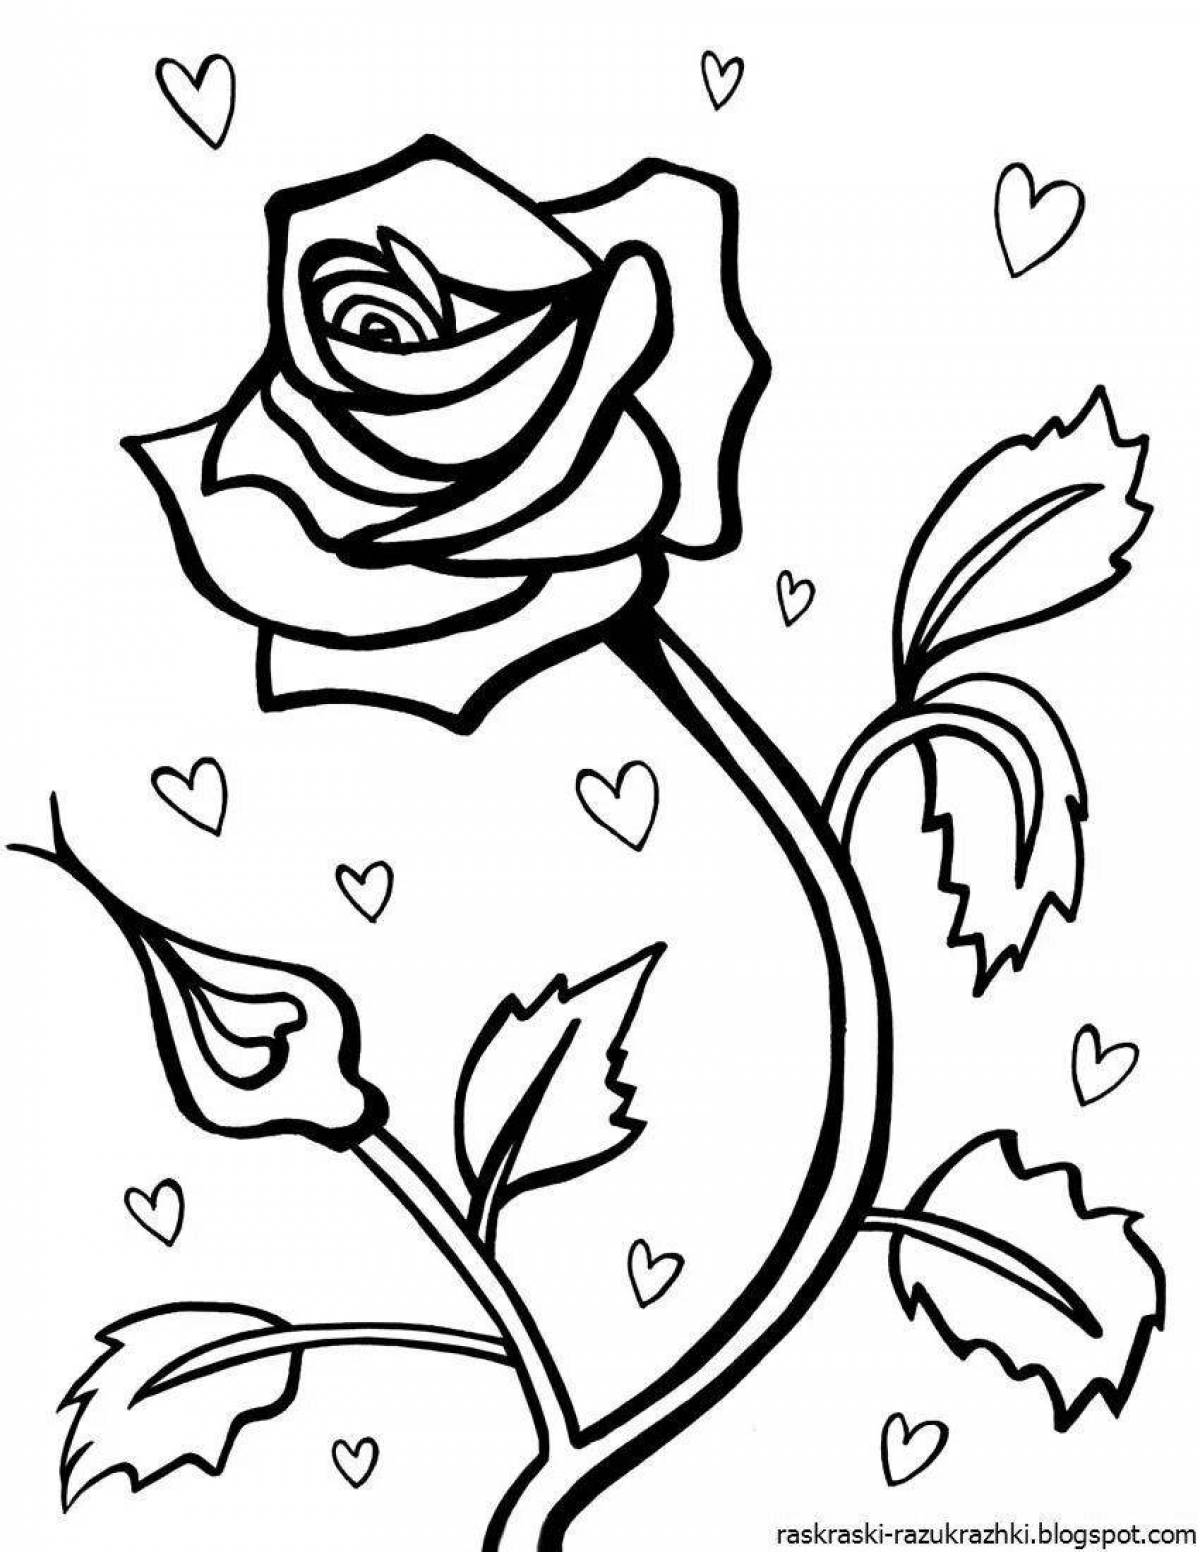 Gorgeous rose coloring pages